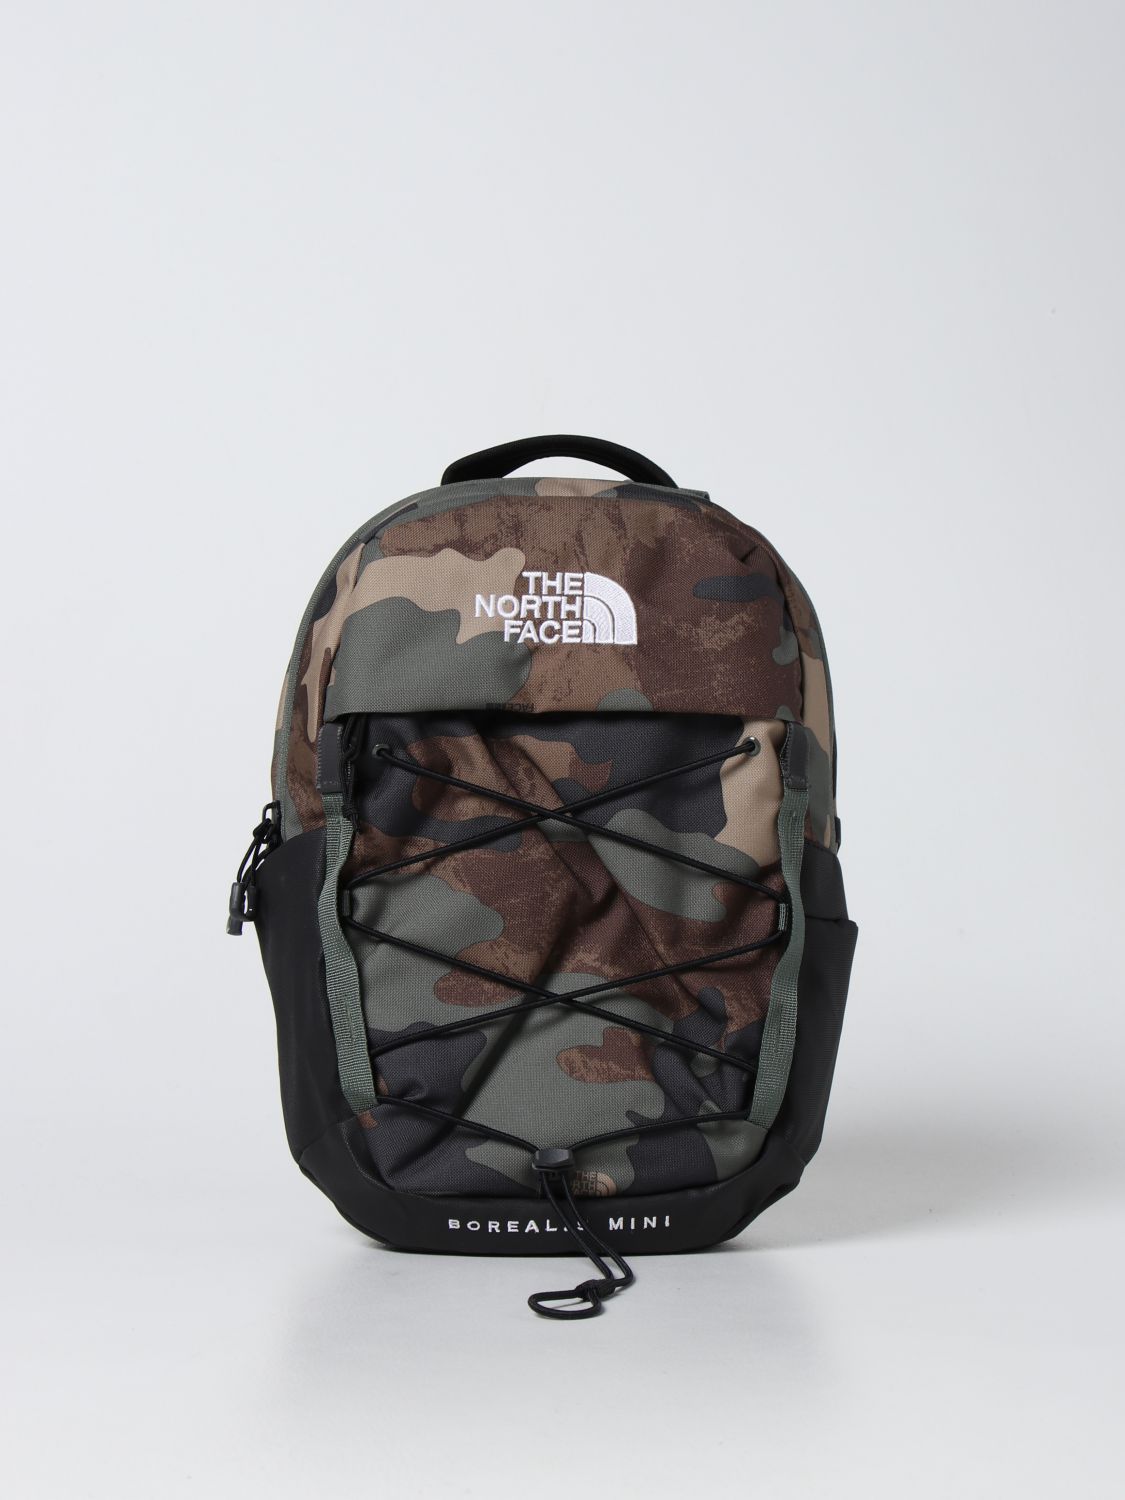 Backpack The North Face: The North Face mini Borealis backpack with logo military 1